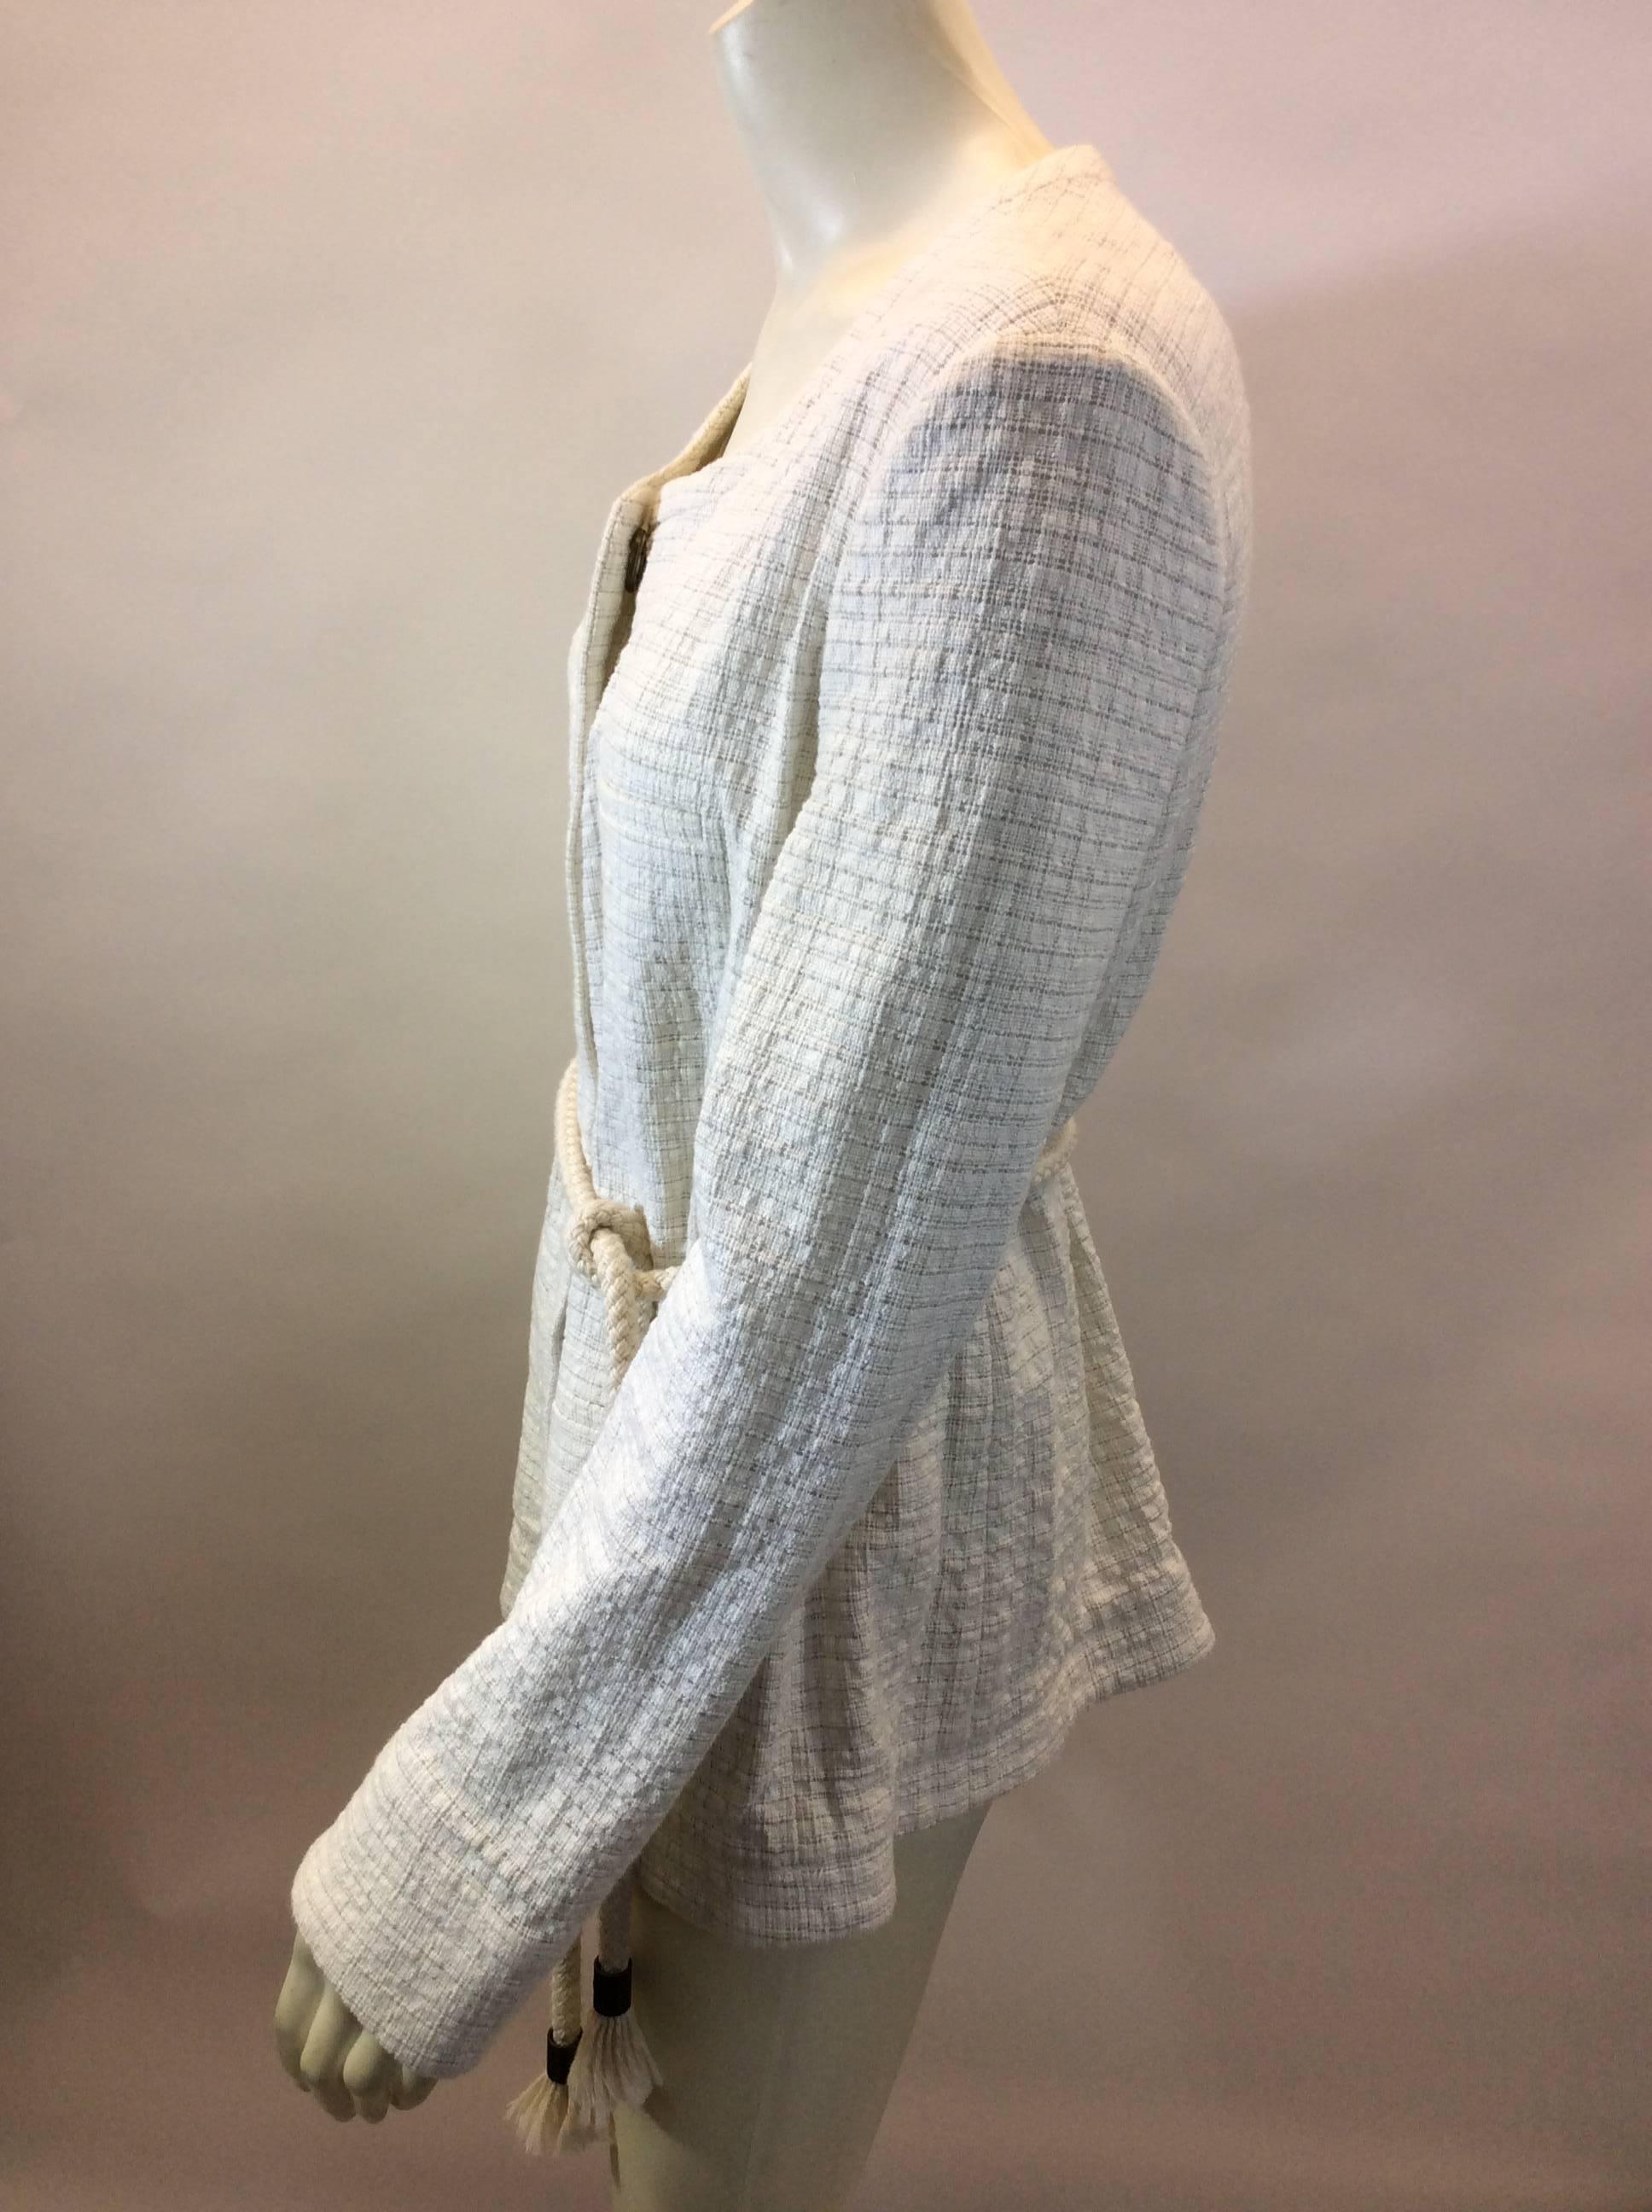 See By Chloe White Jacket with Rope Tie
$165
93% Cotton
6% Nylon
1% Elastane
Made in Italy
Size 6
Length 25